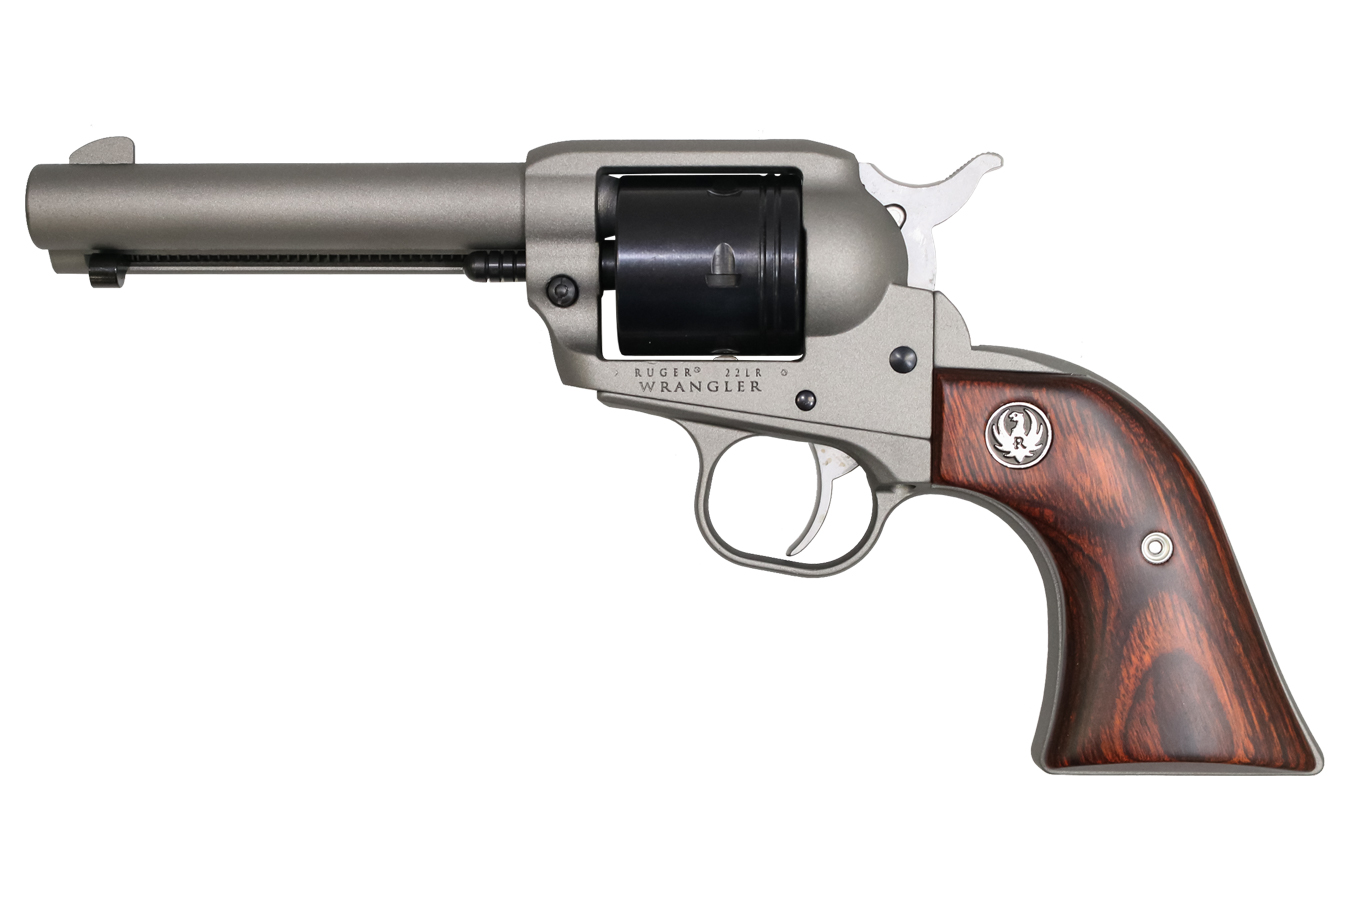 RUGER WRANGLER SILVER WITH WOOD GRIPS